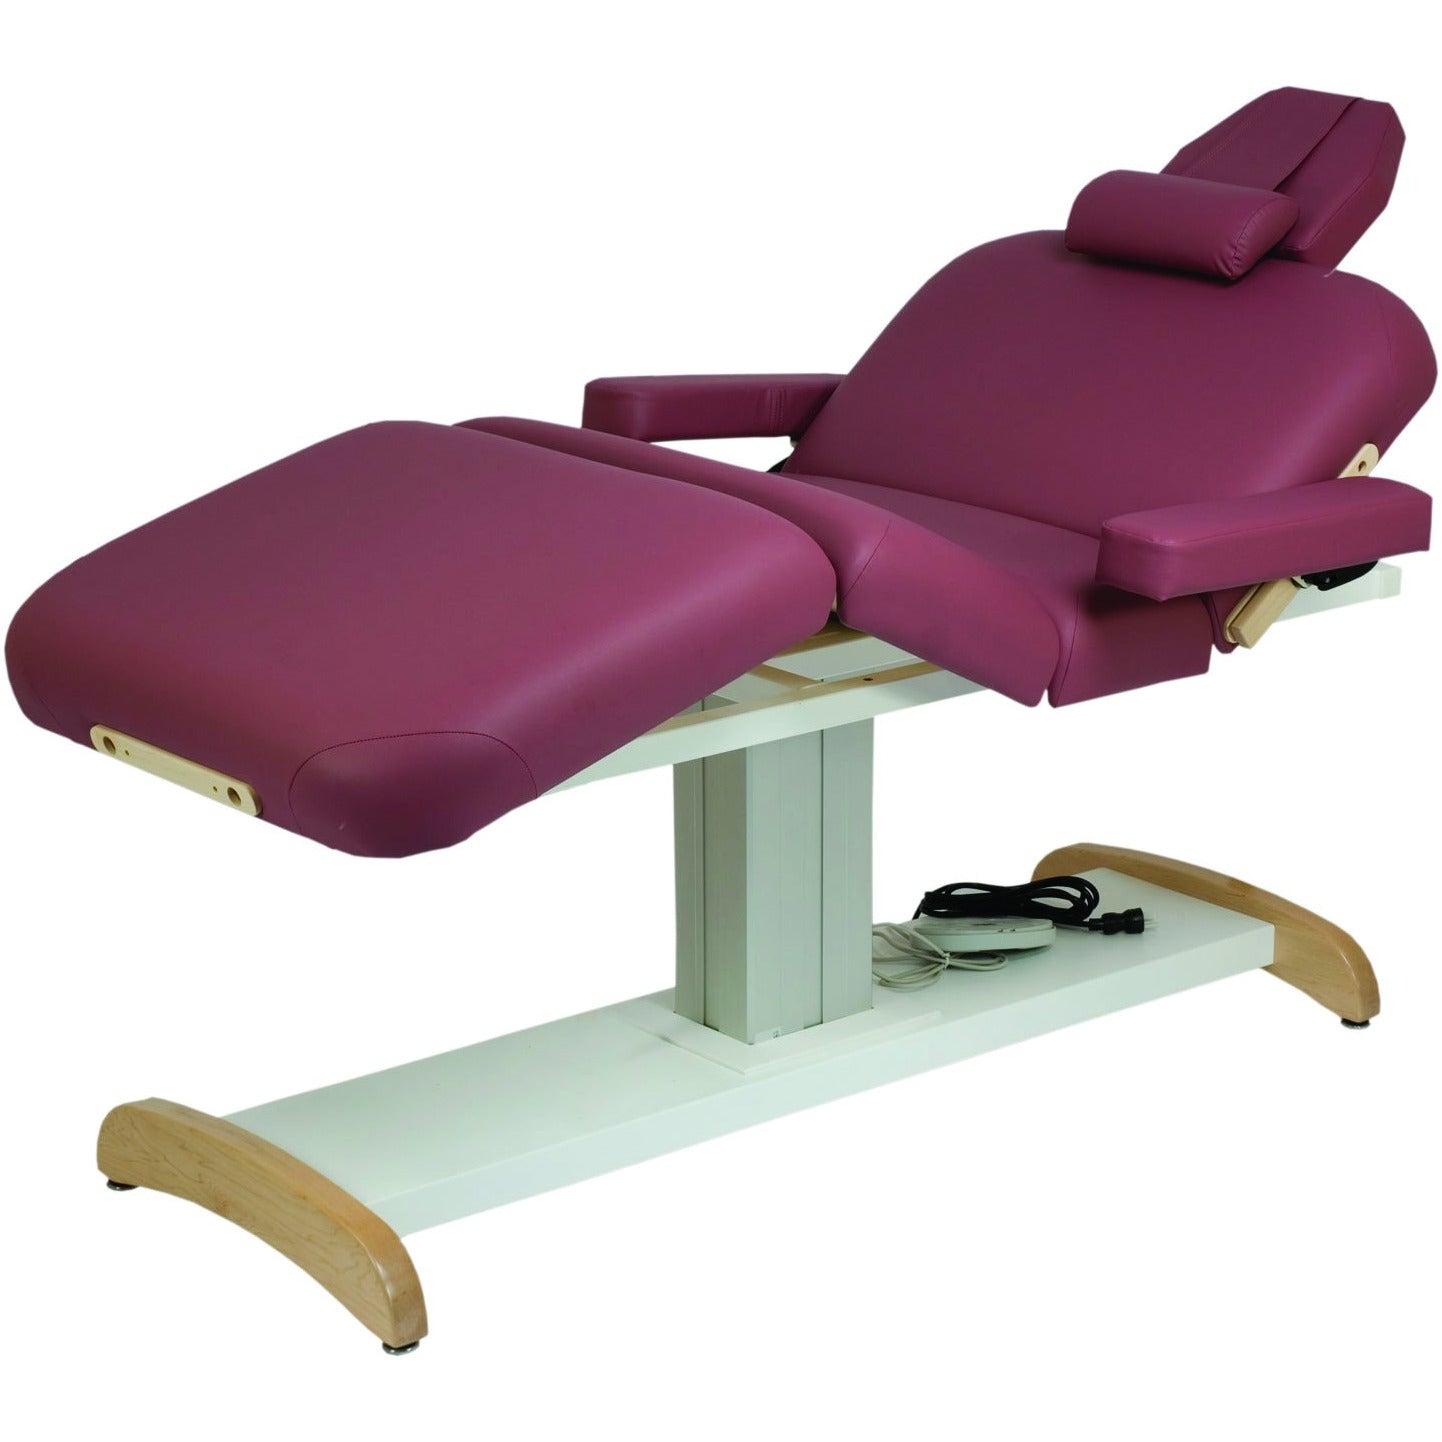 Custom Craftworks MAJESTIC Deluxe Electric Lift Massage Table